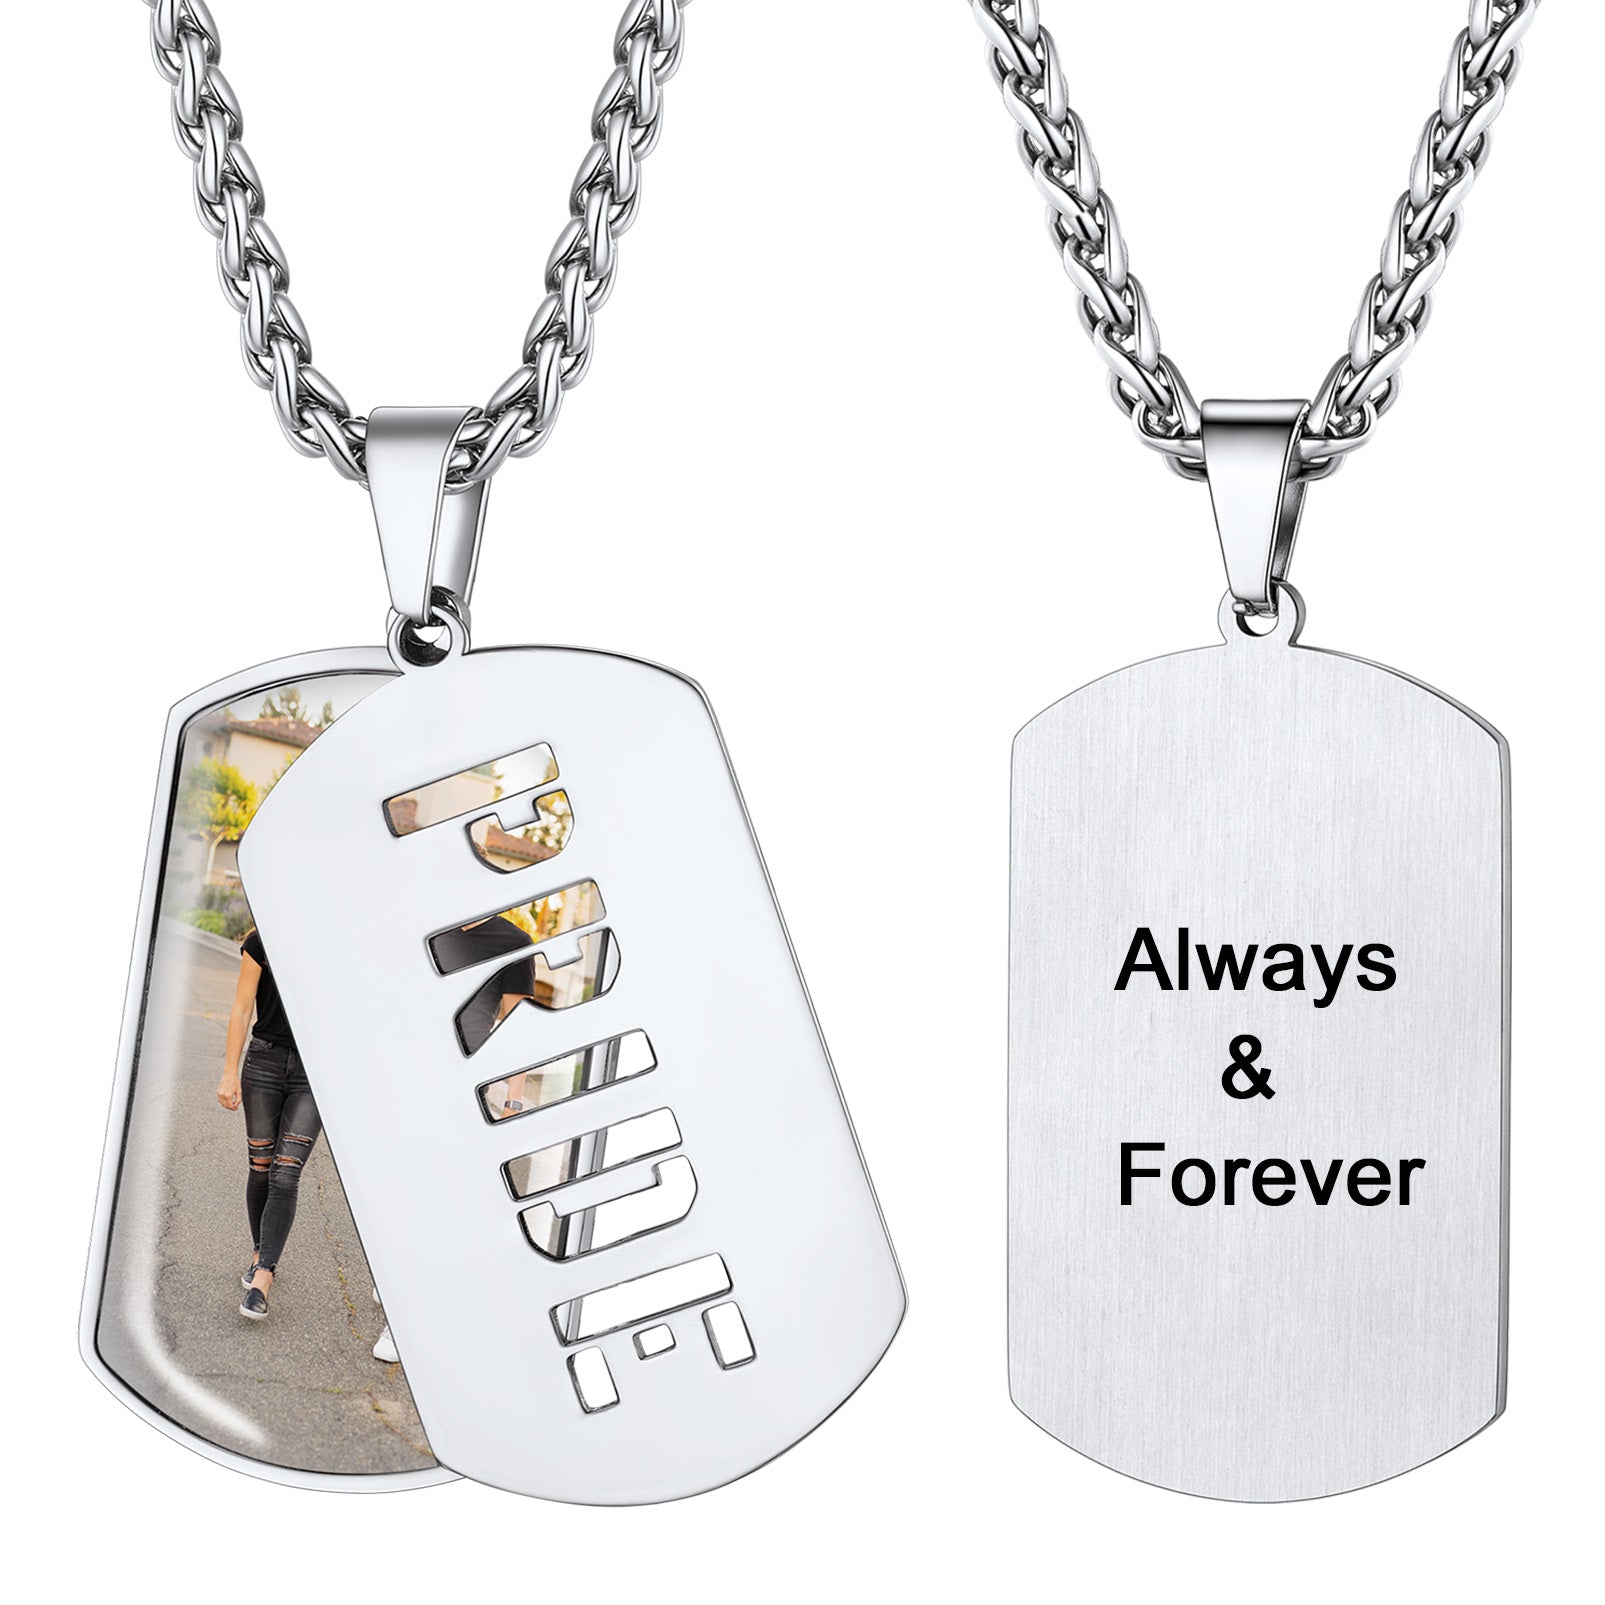 Customized Name Photo Dog Tag Memorial Necklace With Picture FaithHeart